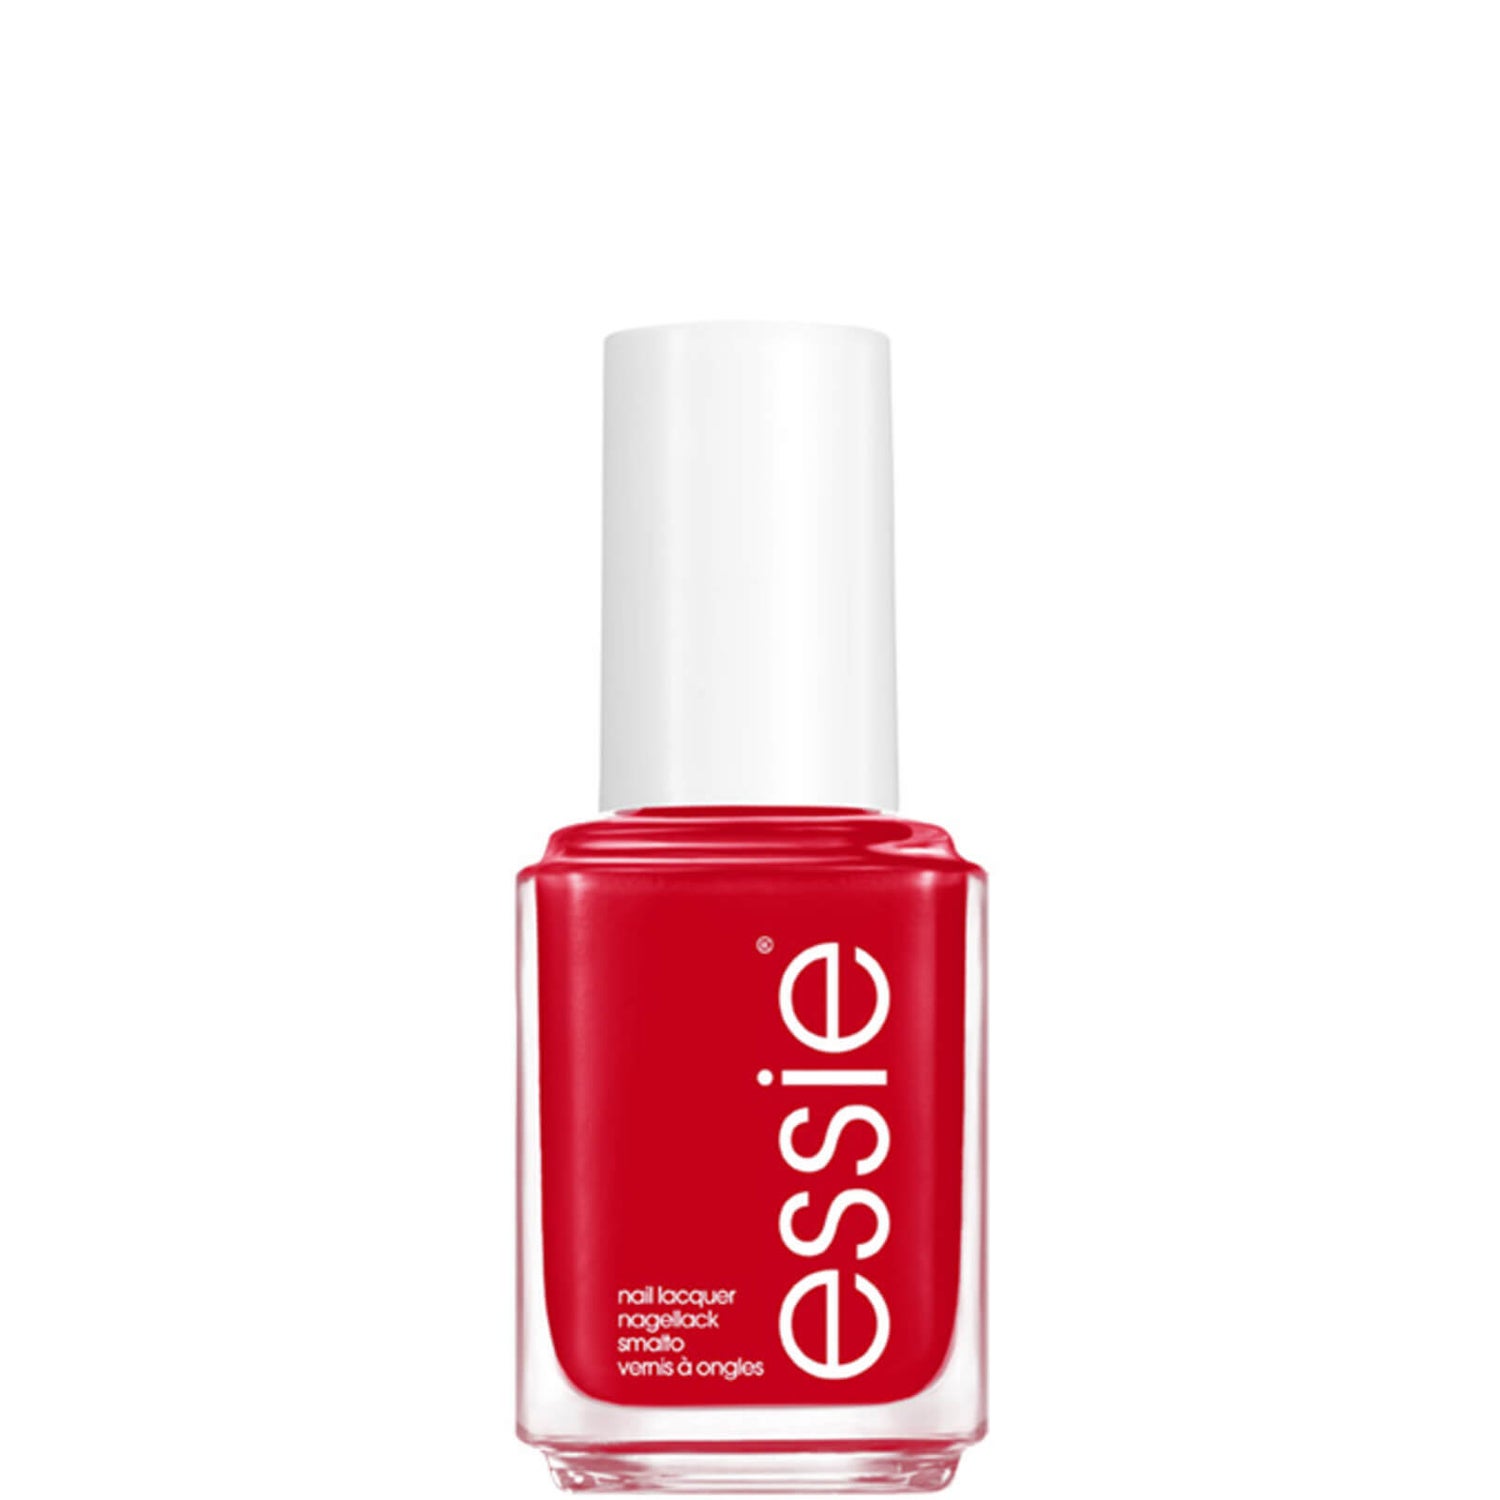 essie Nail Polish - 750 Not Red-Y for Bed 13.5ml - LOOKFANTASTIC